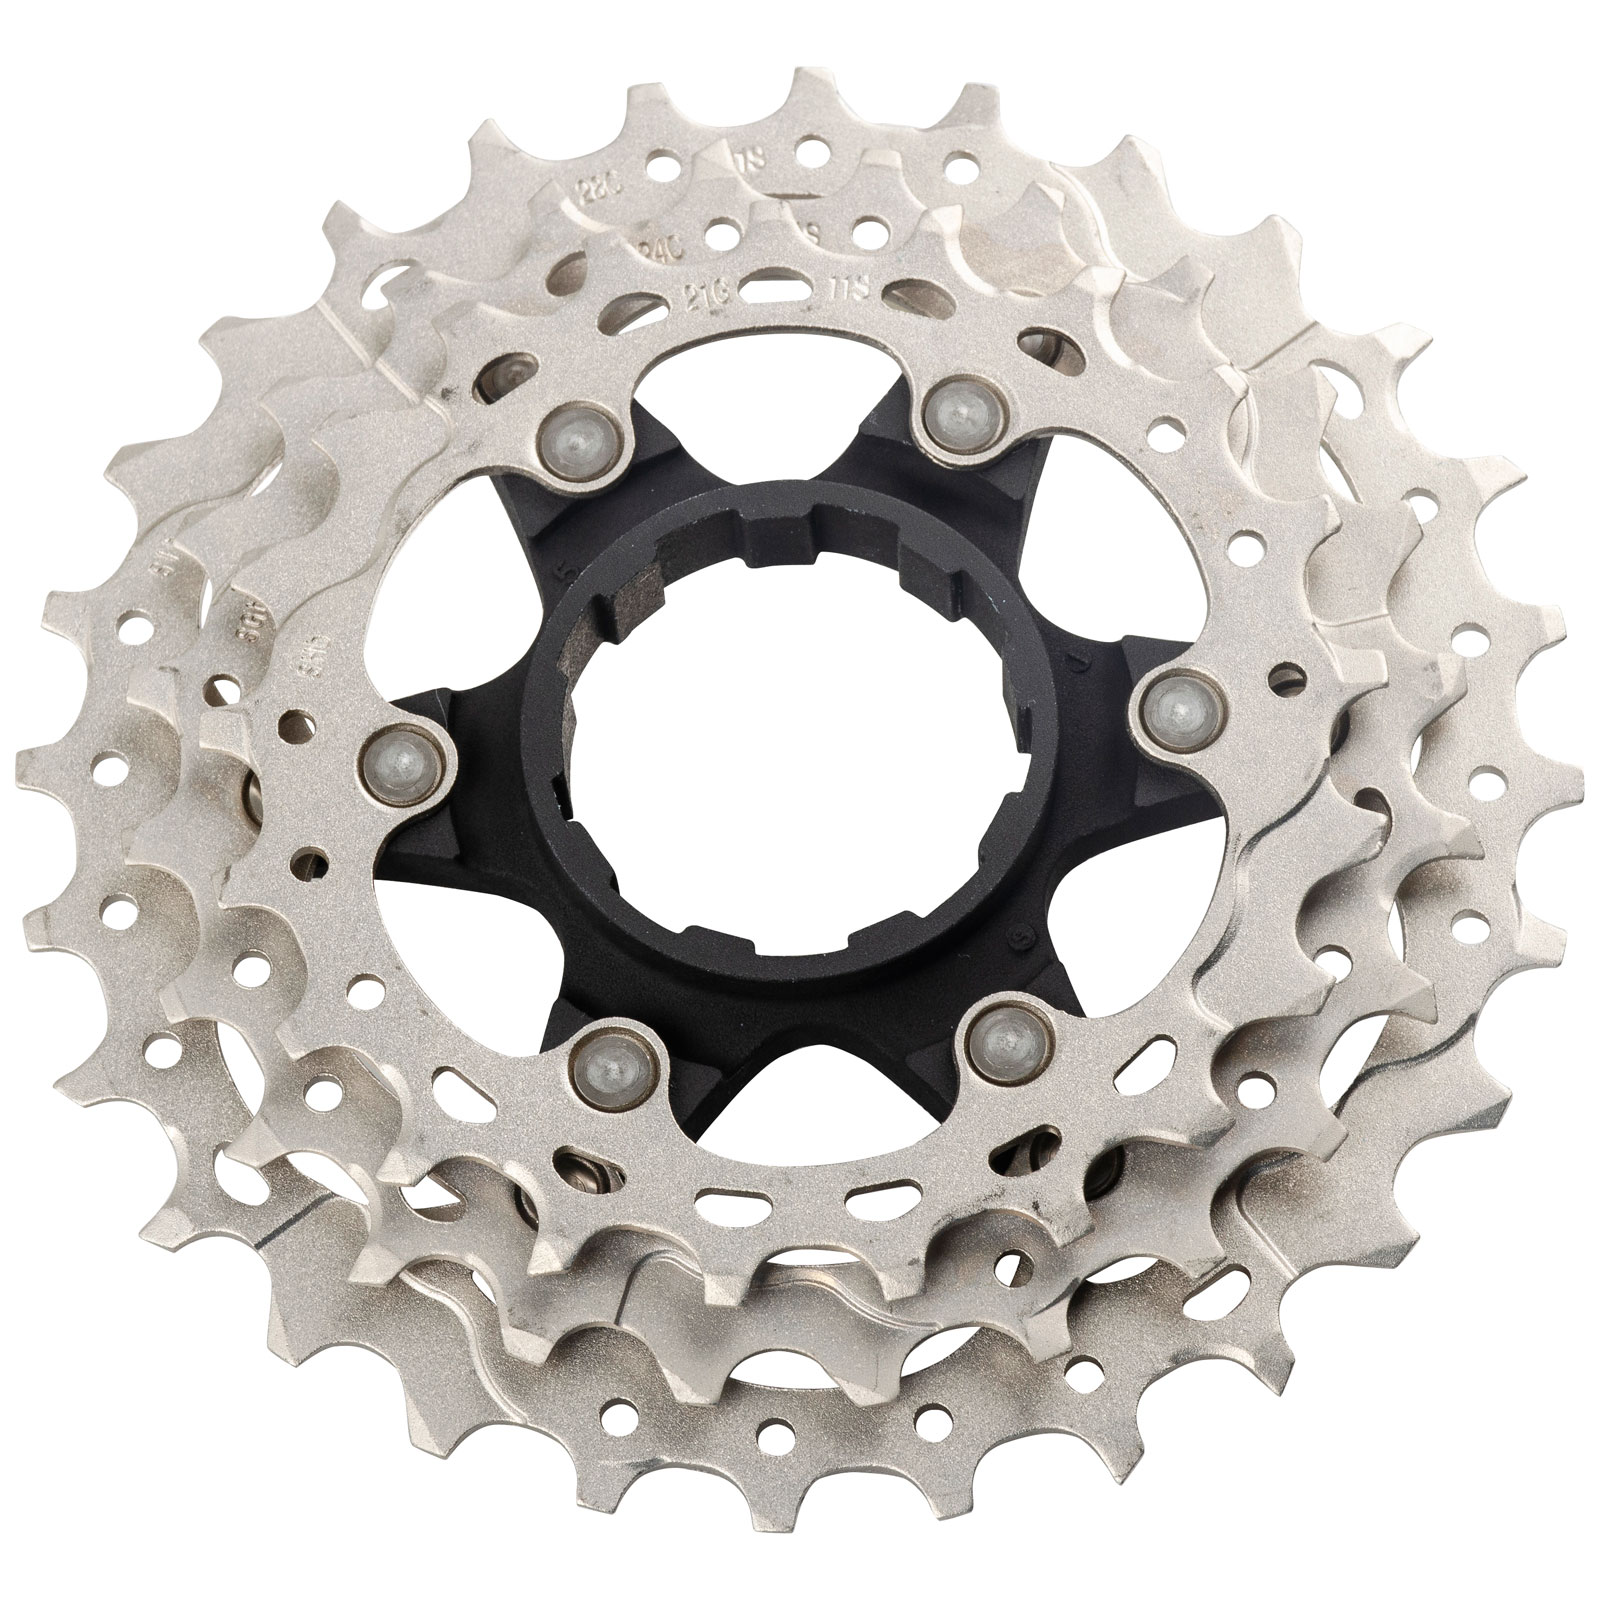 Picture of Shimano Sprocket for Deore XT / SLX 11-speed Cassette - 21/24/28 teeth for 11-42 (Y1RK98030) - CS-M8000